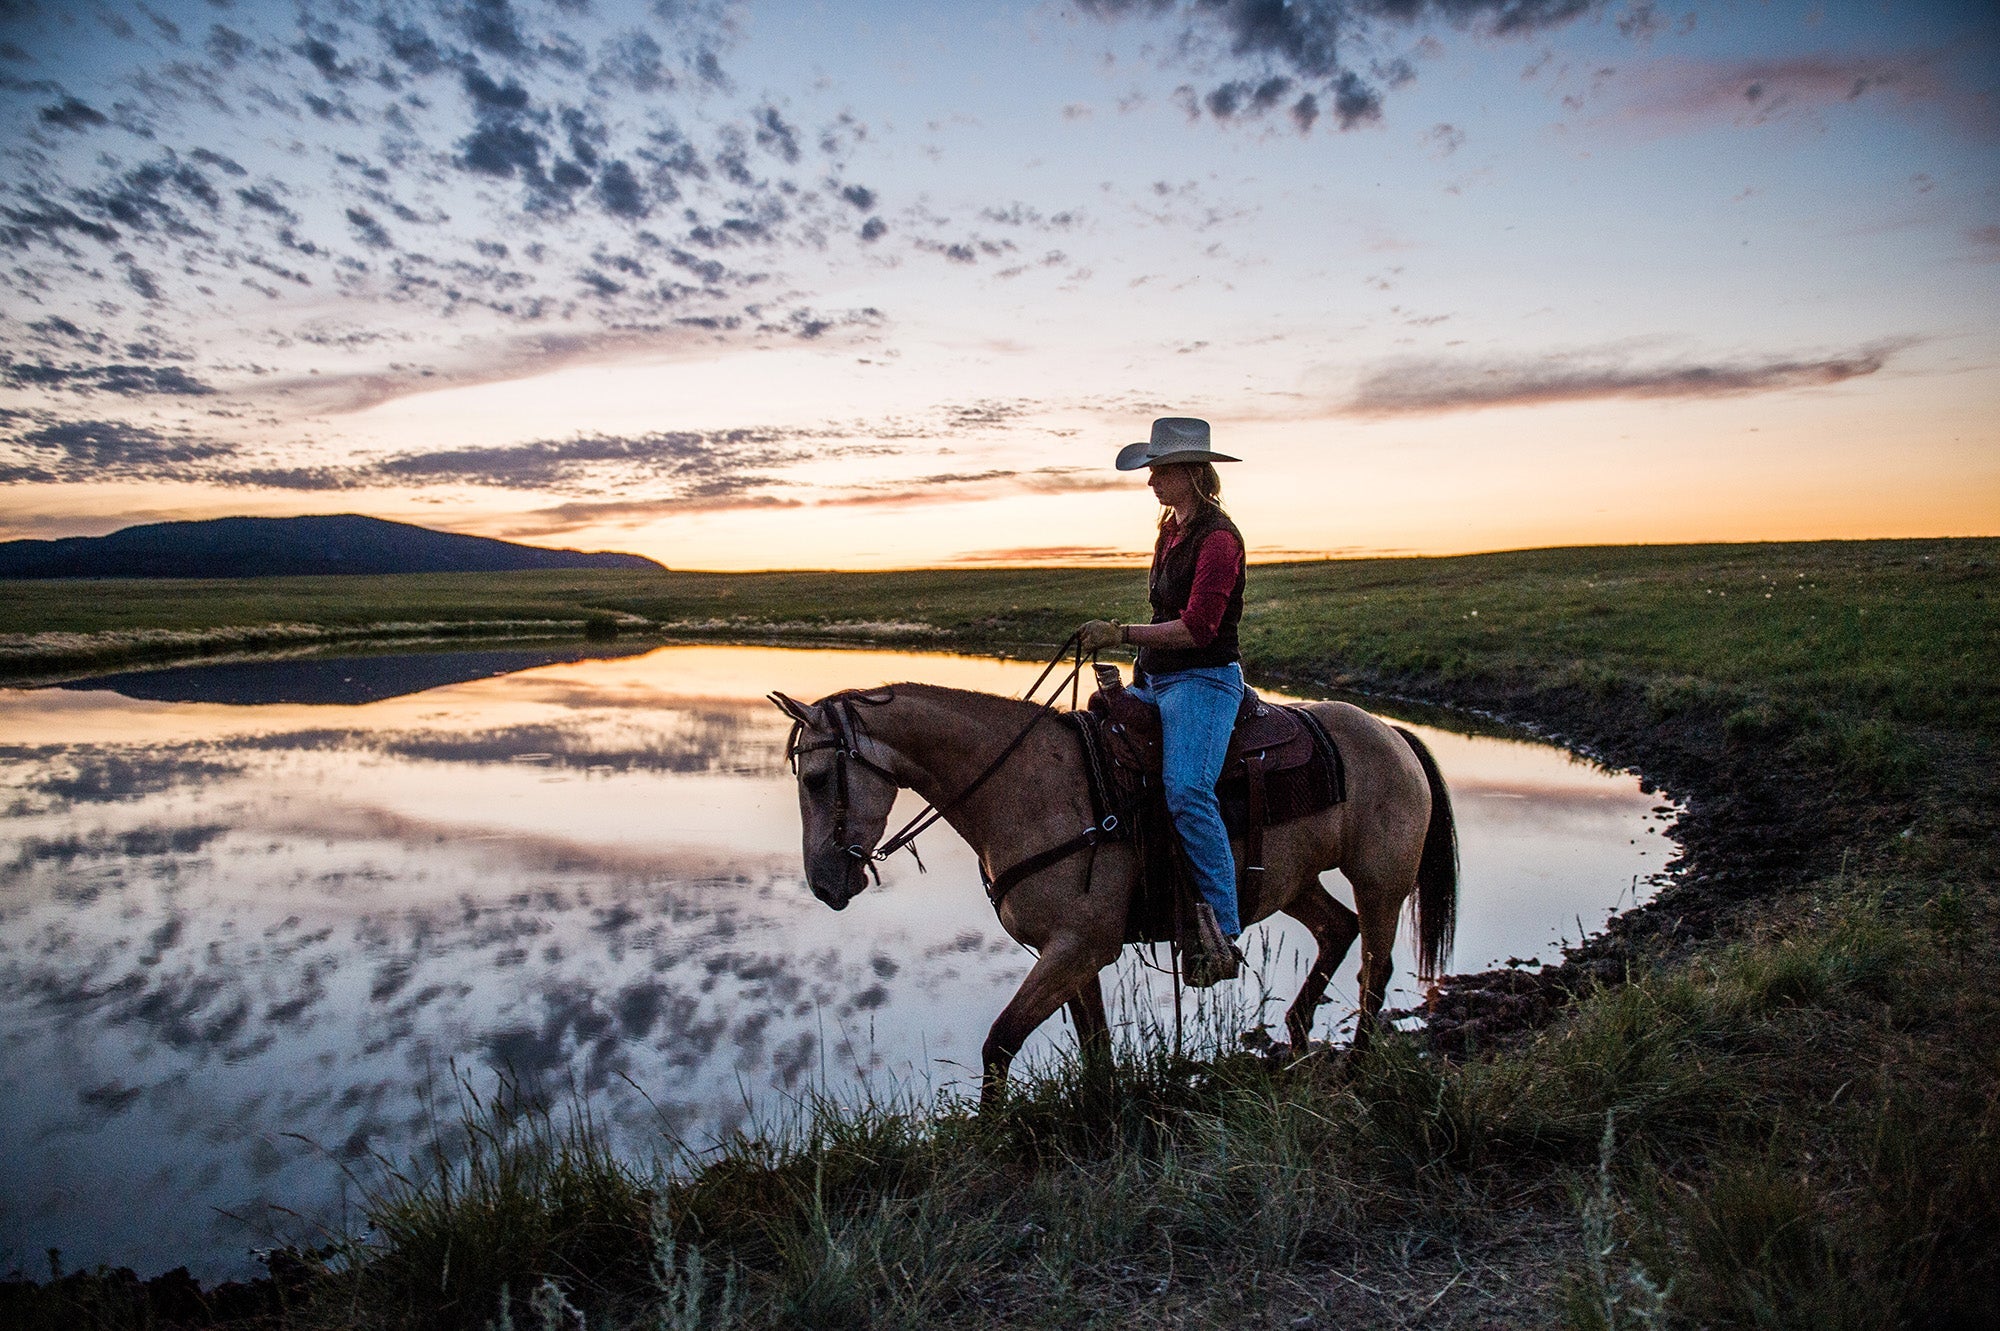 A bird researcher rides past water on a ranch in Montana.